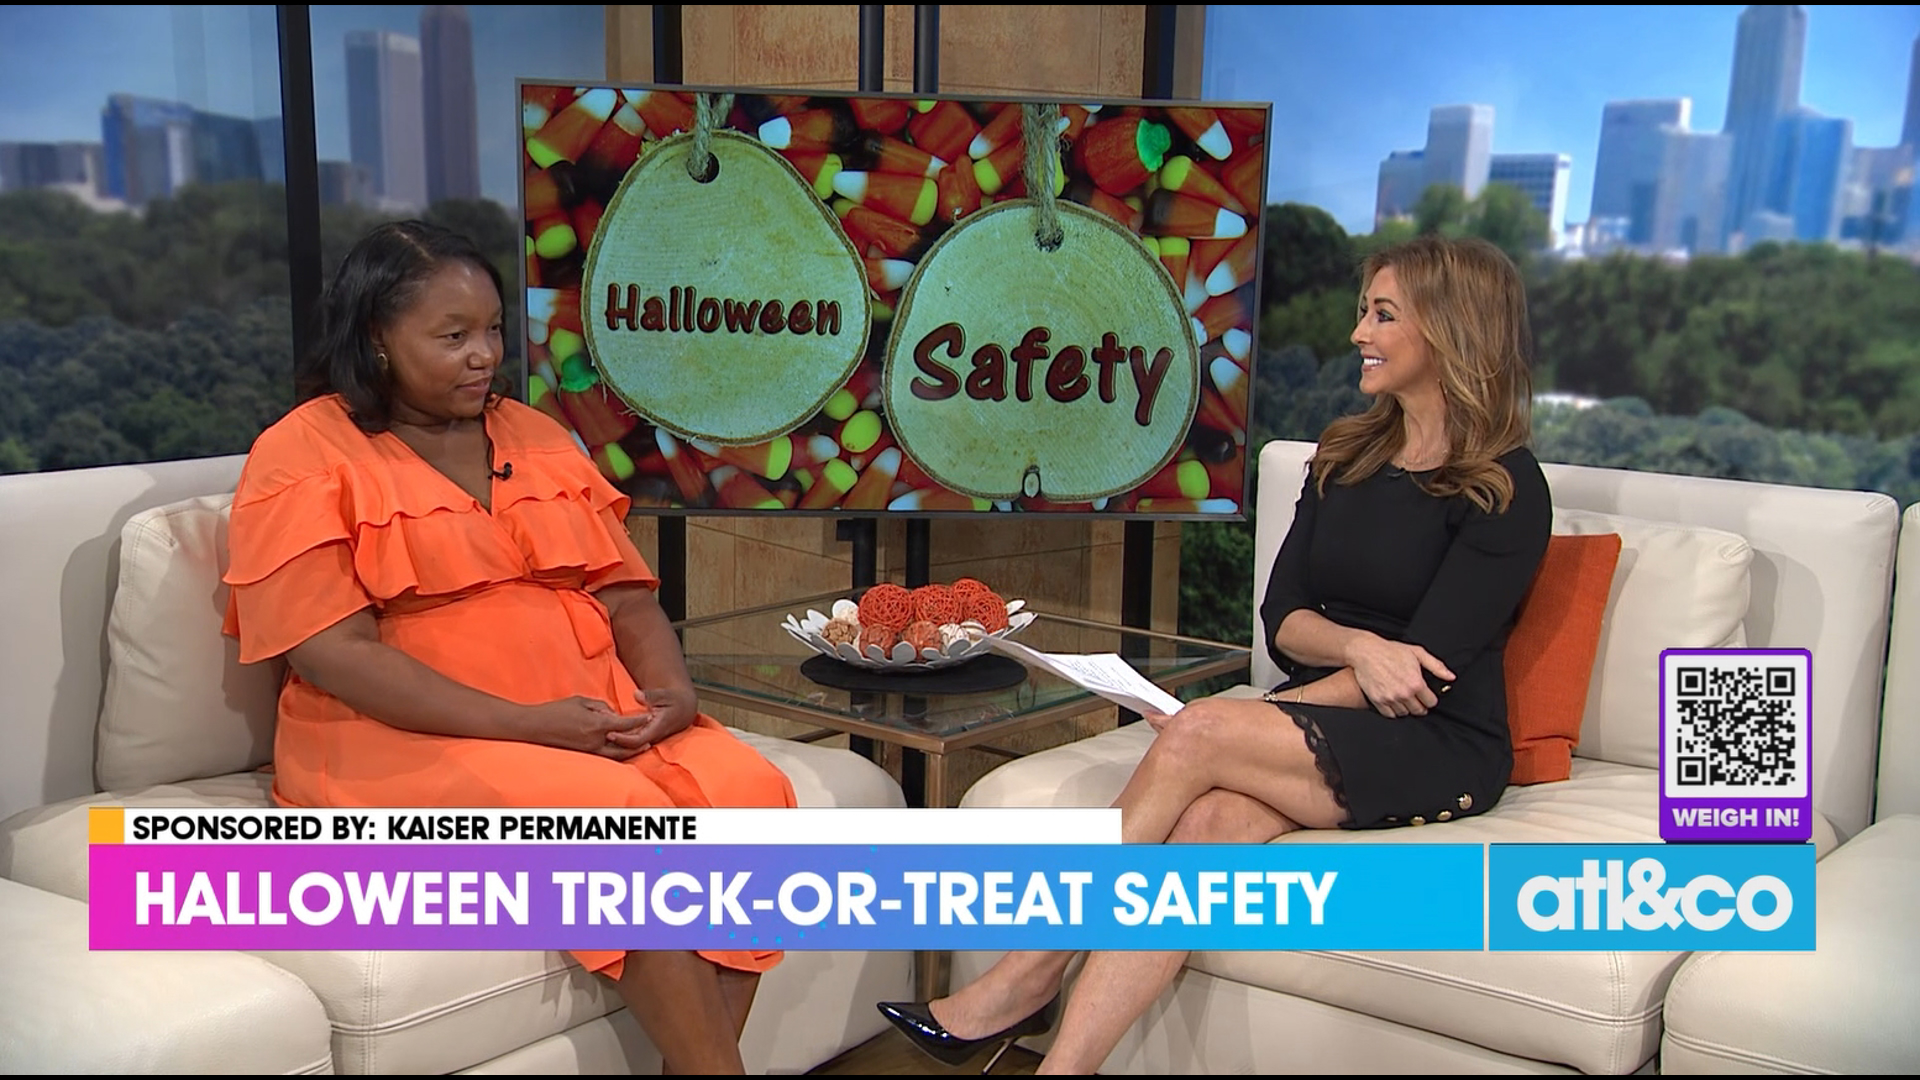 Kaiser Permanente shares helpful tips and precautions to keep the whole family safe this Halloween.